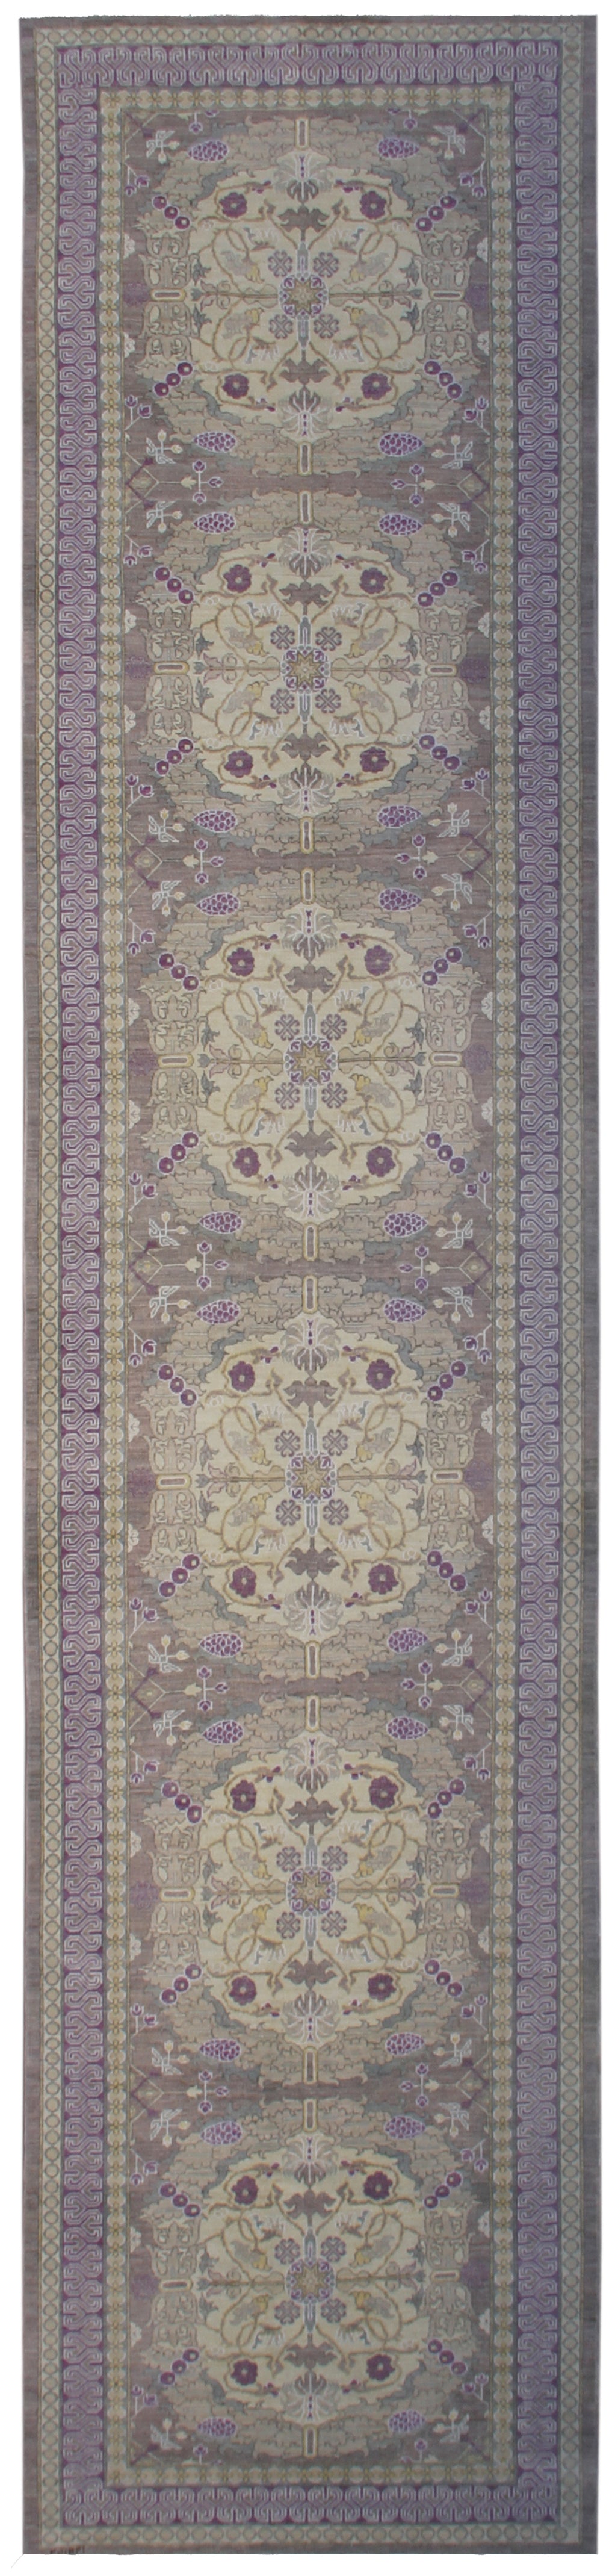 4'x18' Spanish Design Ariana Transitional Long And wide Runner Rug